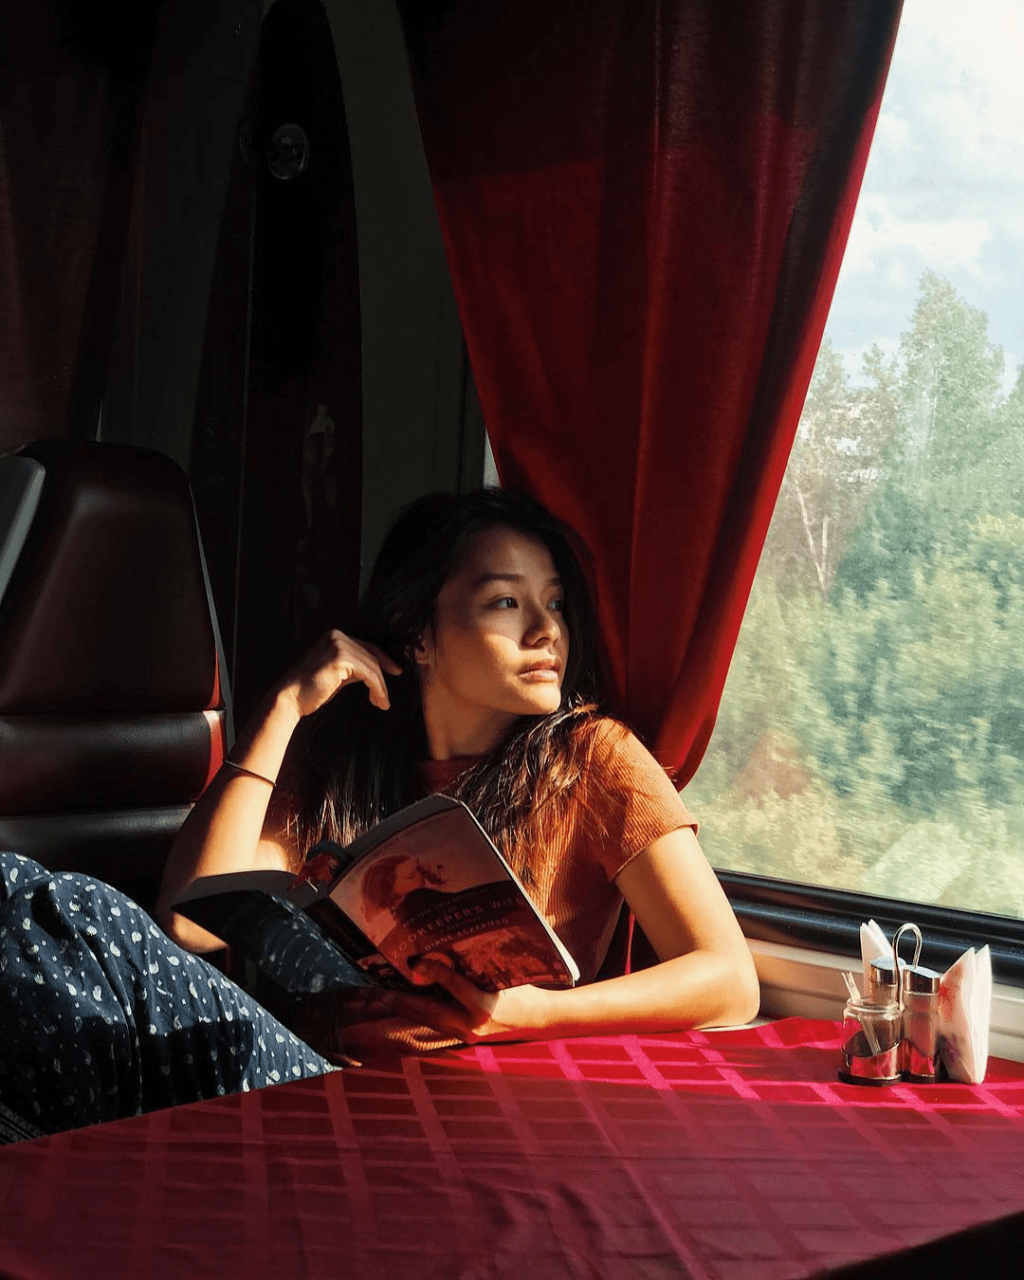 Looking out of window in trans-siberian train